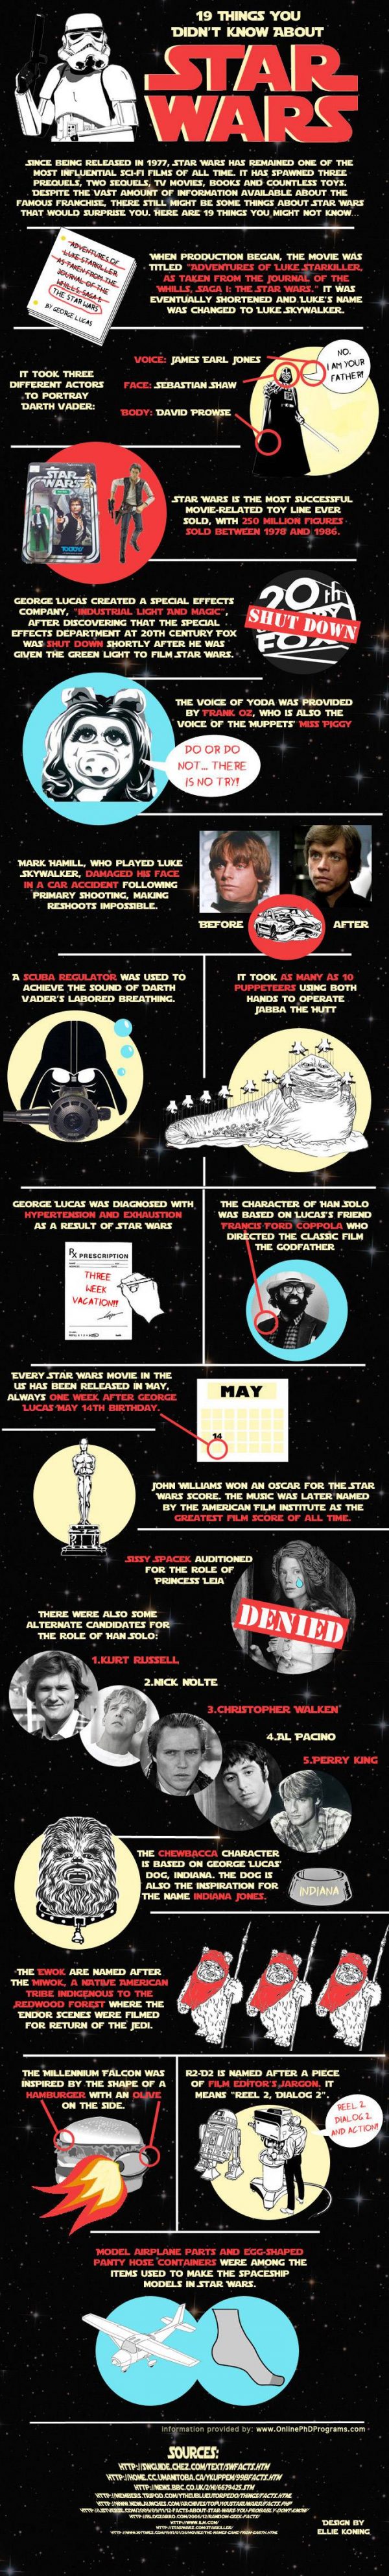 19 Things you didn't know about Star Wars (Infographic)